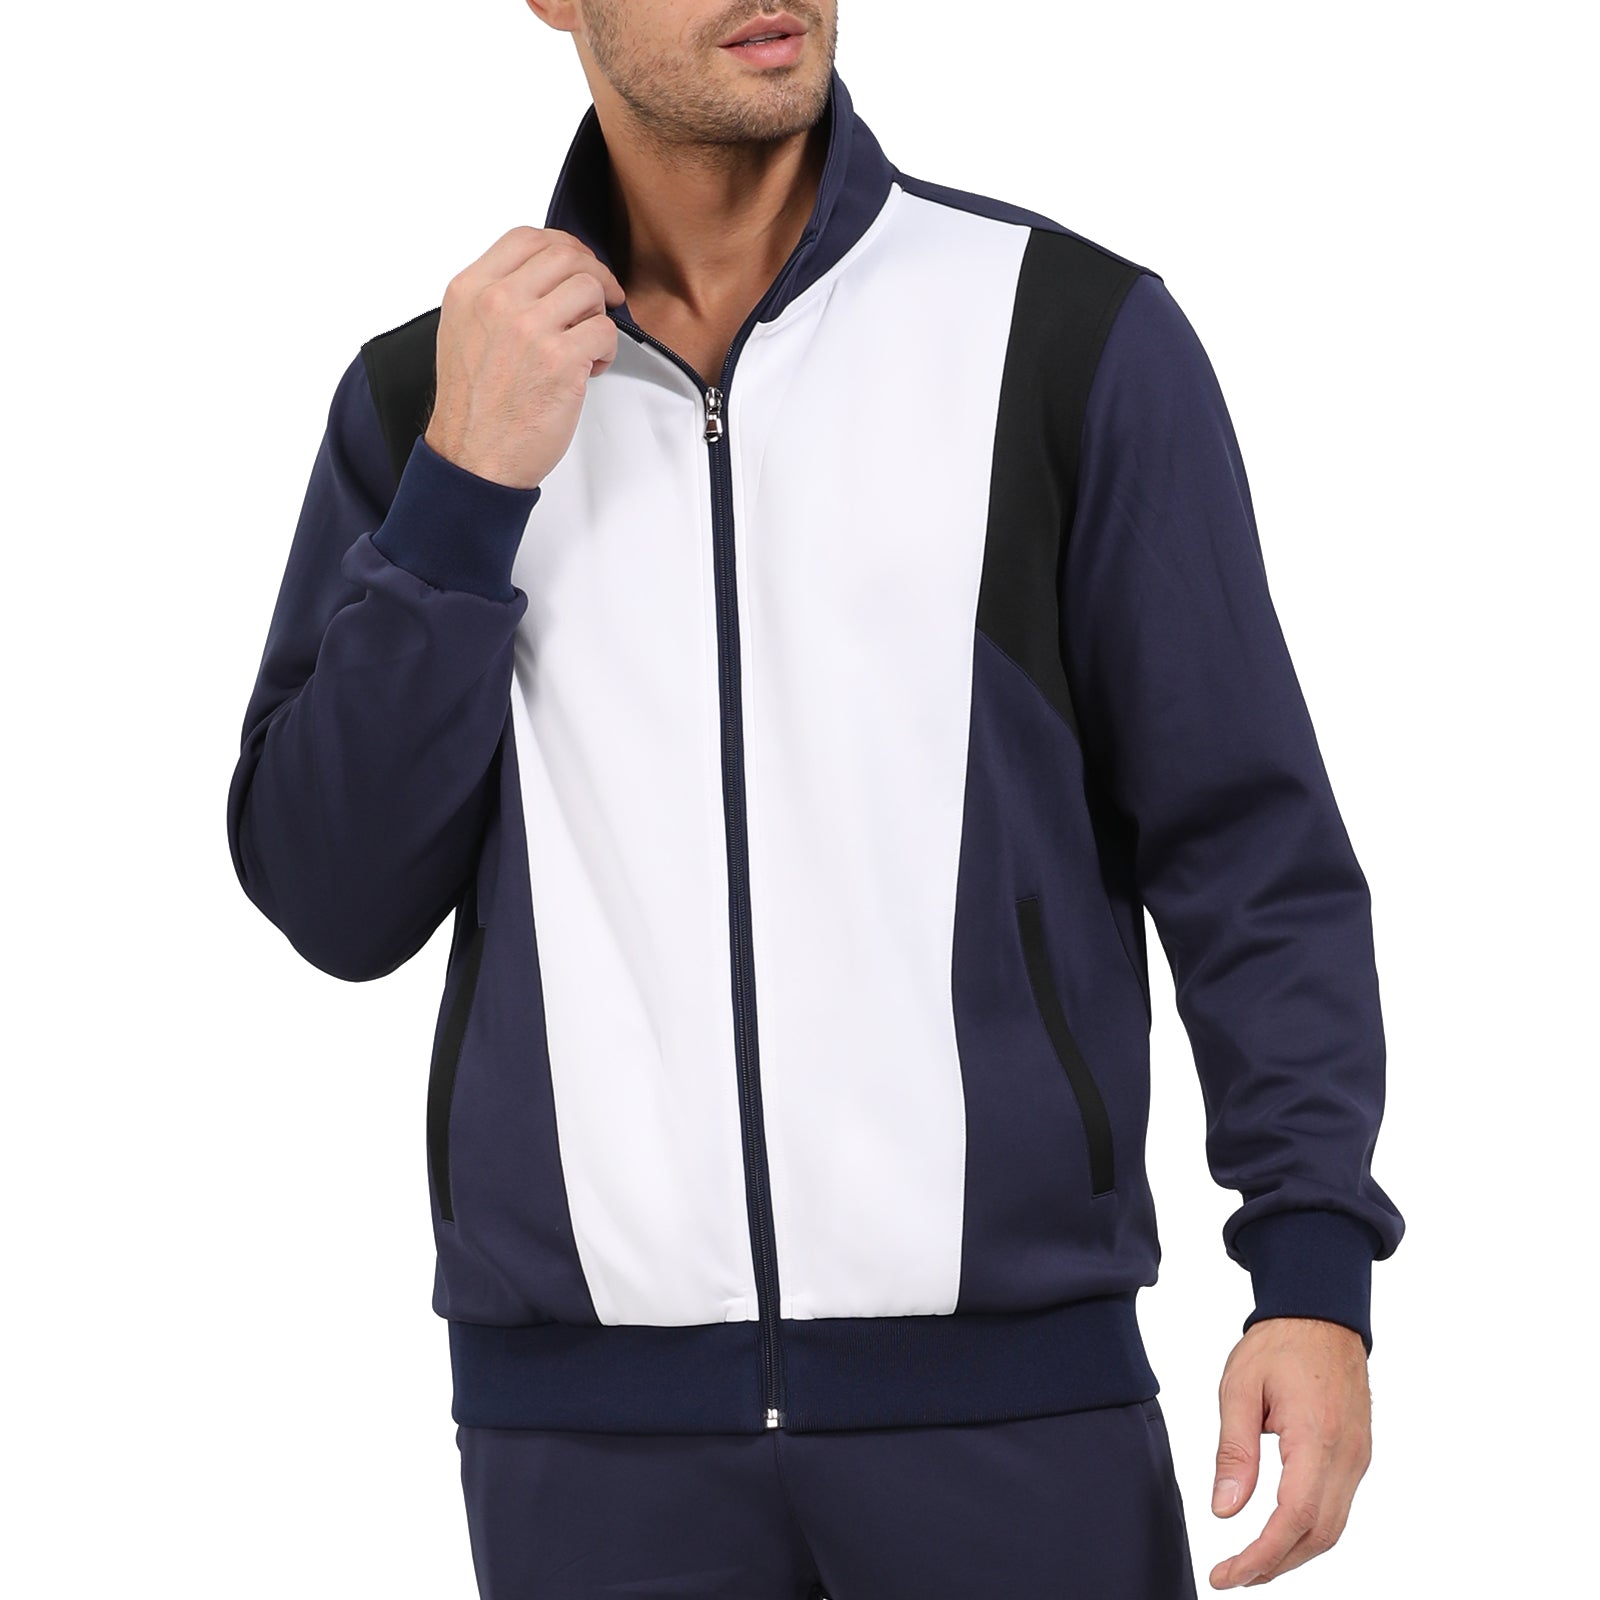 CRYSULLY Mens Tracksuit Full Zip Casual Sports Jogging Sets Gym Sweat Suits